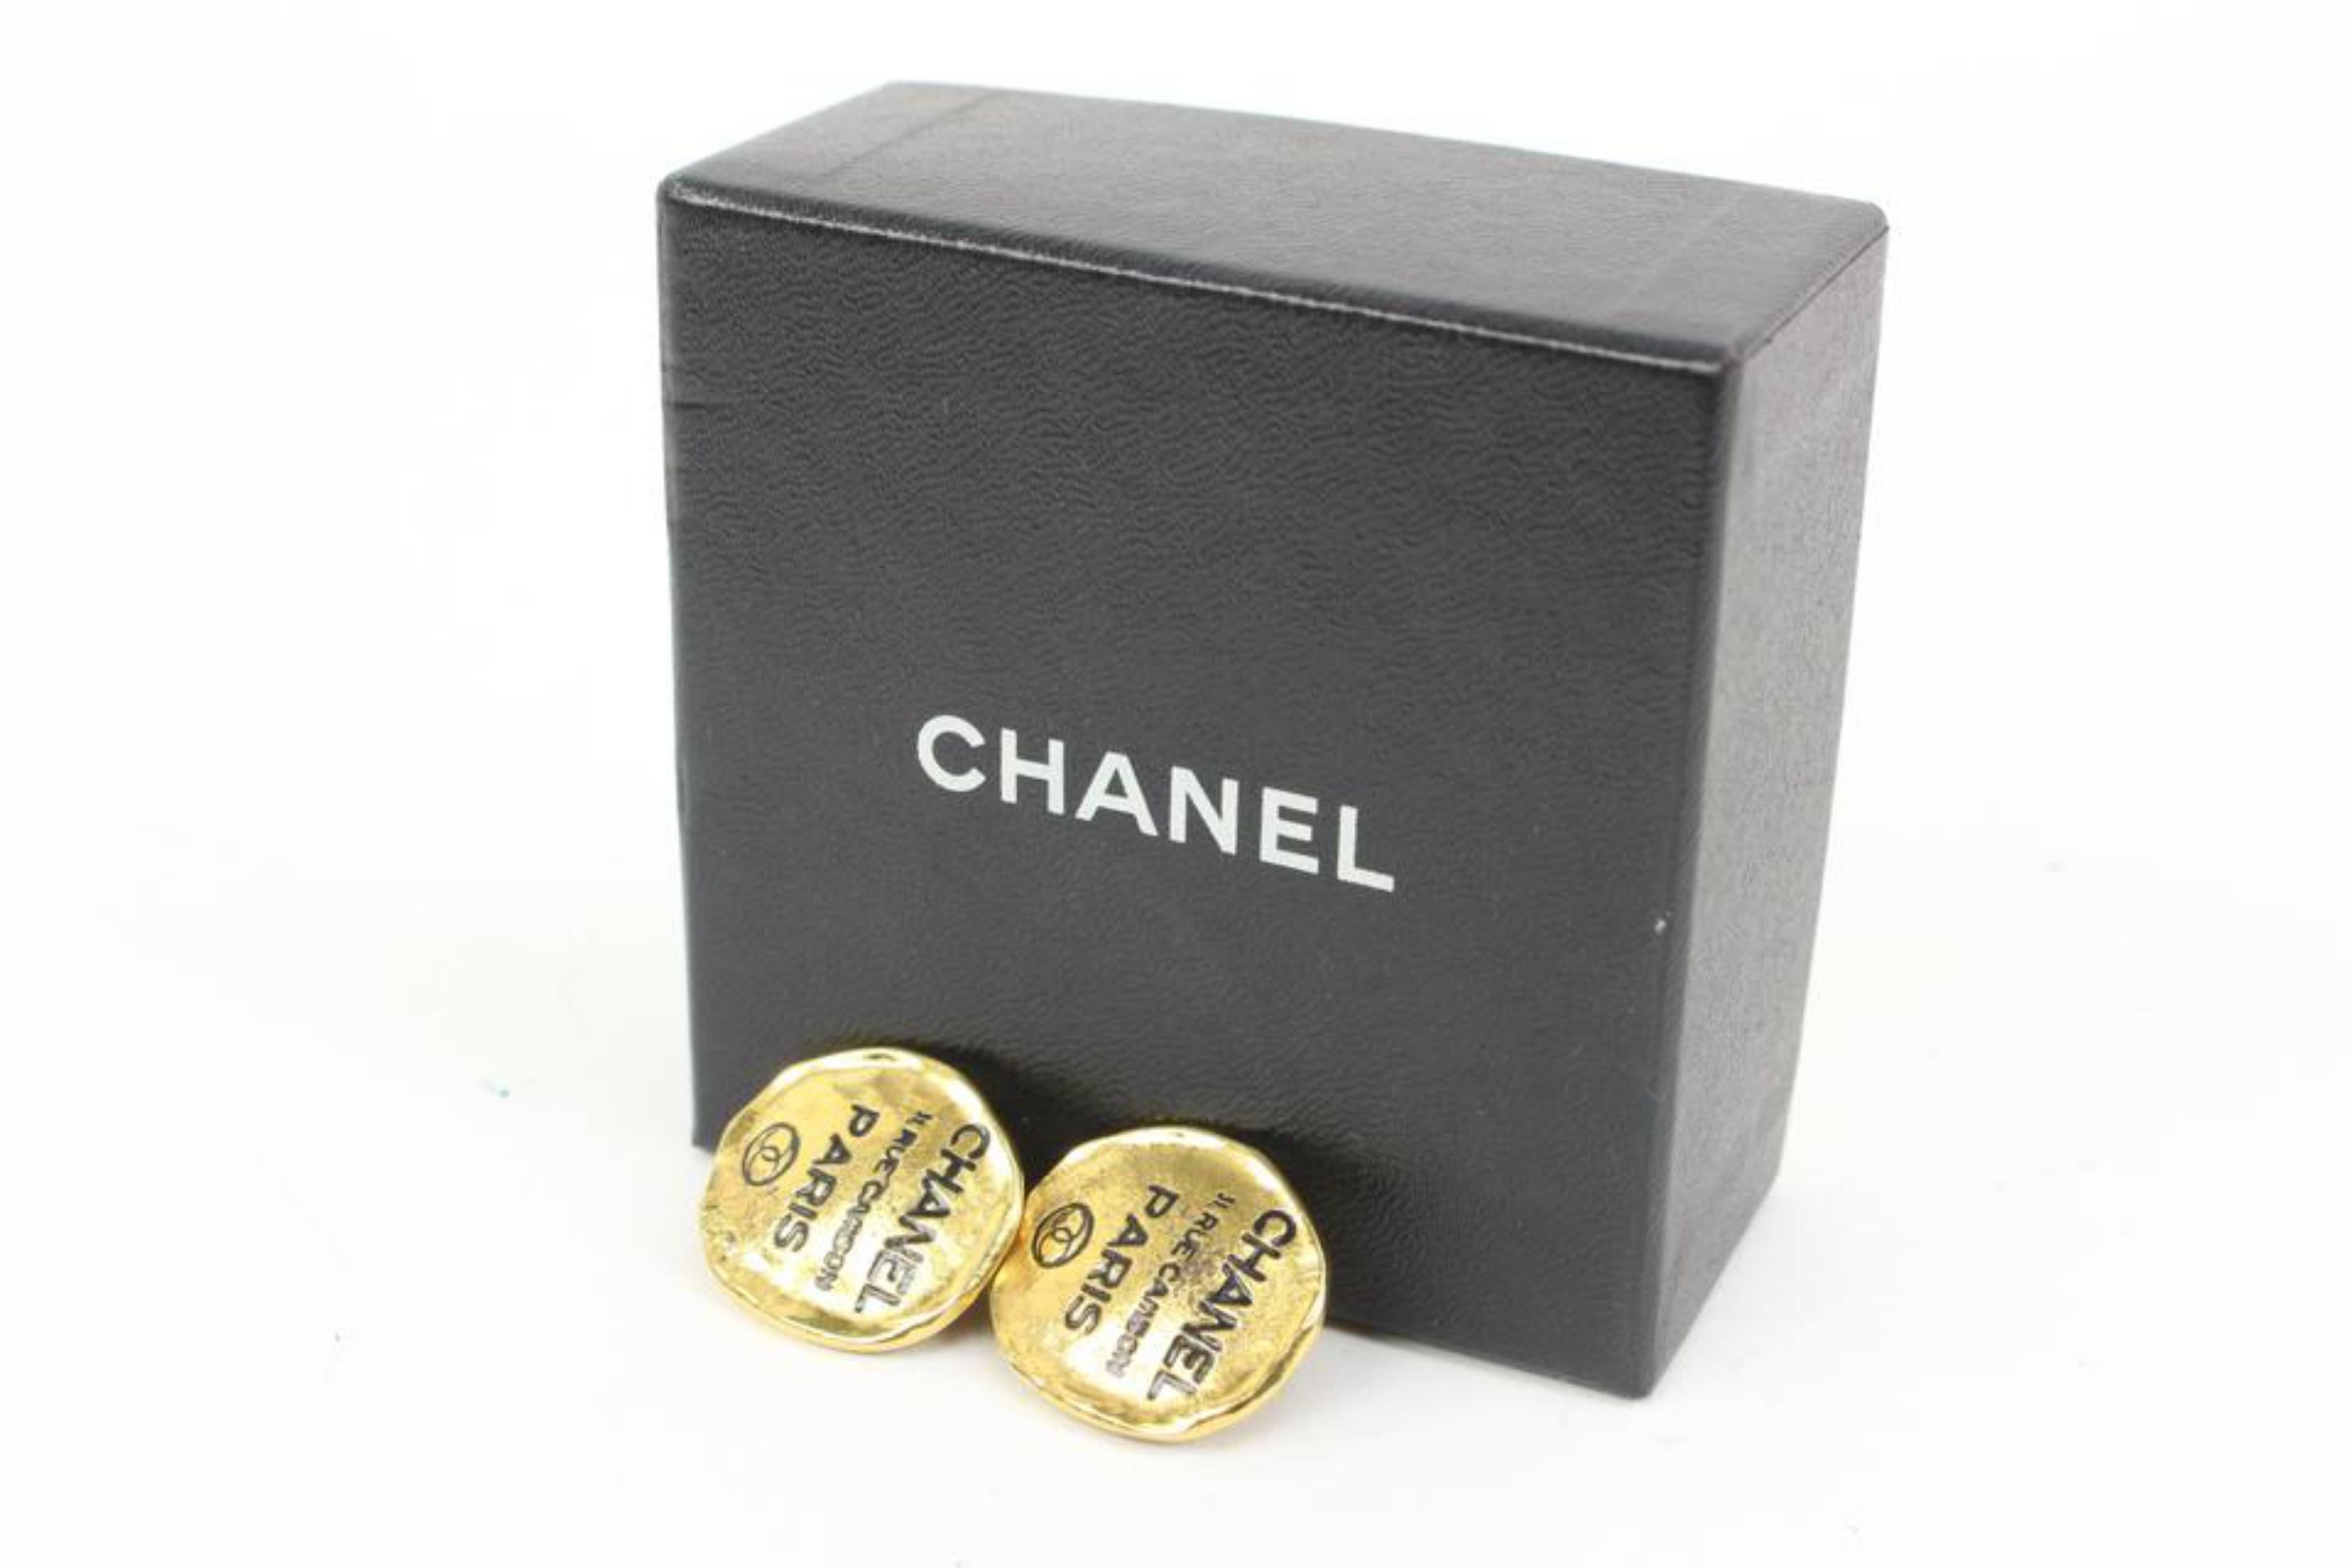 Chanel 1980's Hammered Gold 31 Rue Cambon Paris Earrings 71cz418s
Made In: France
Measurements: Length:  .8